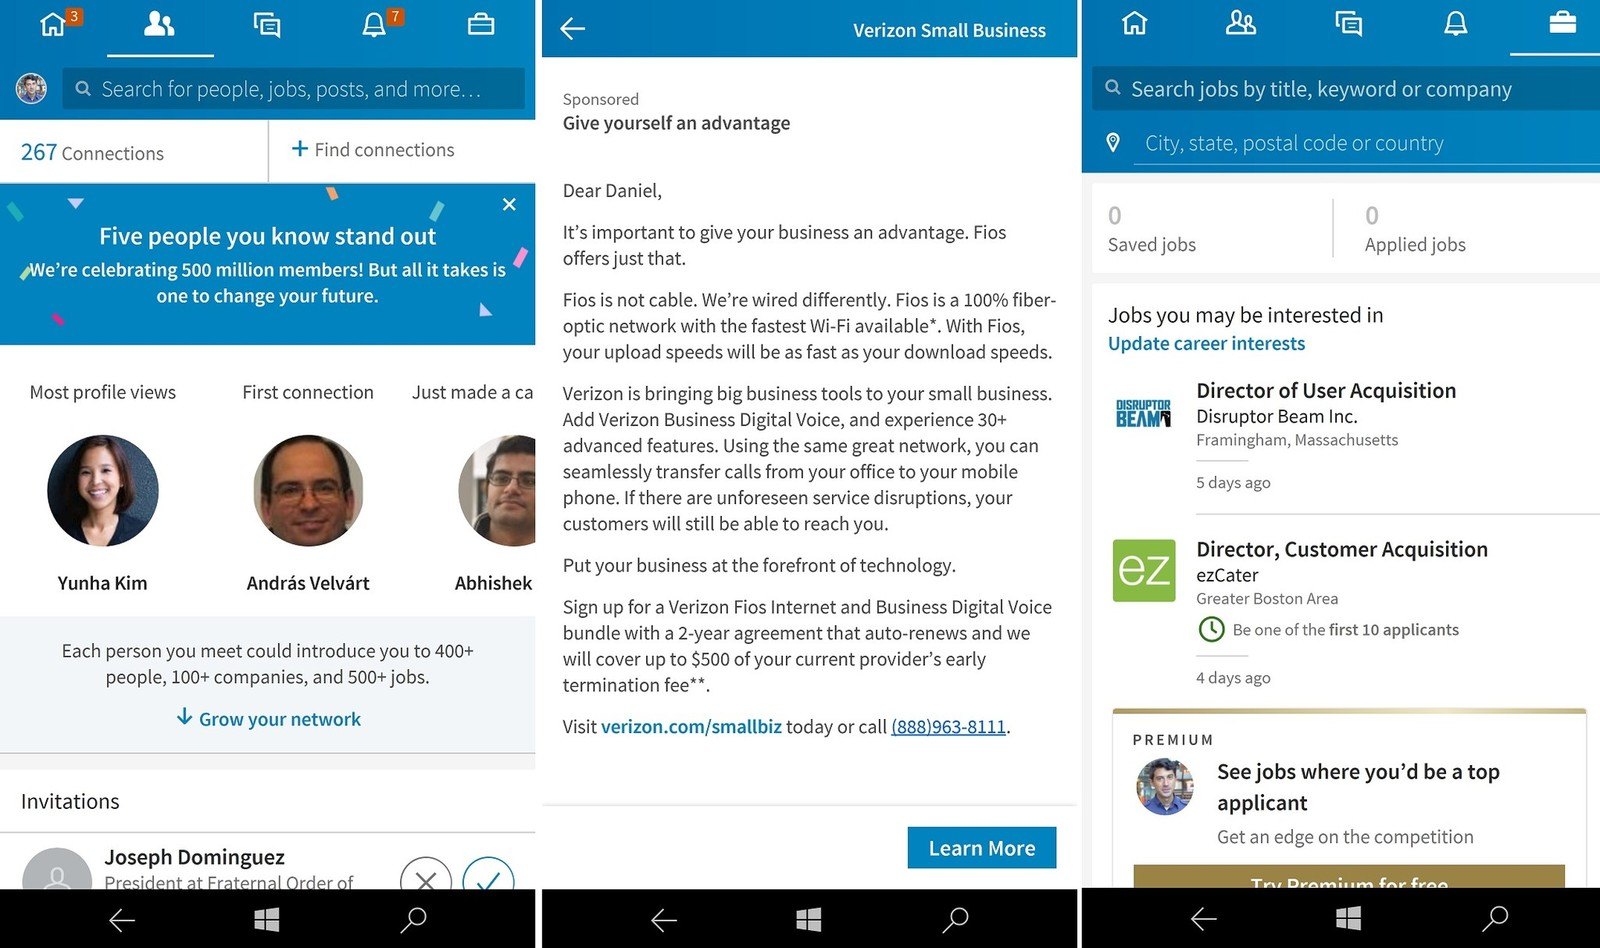 Generate A Professional Network With The LinkedIn App